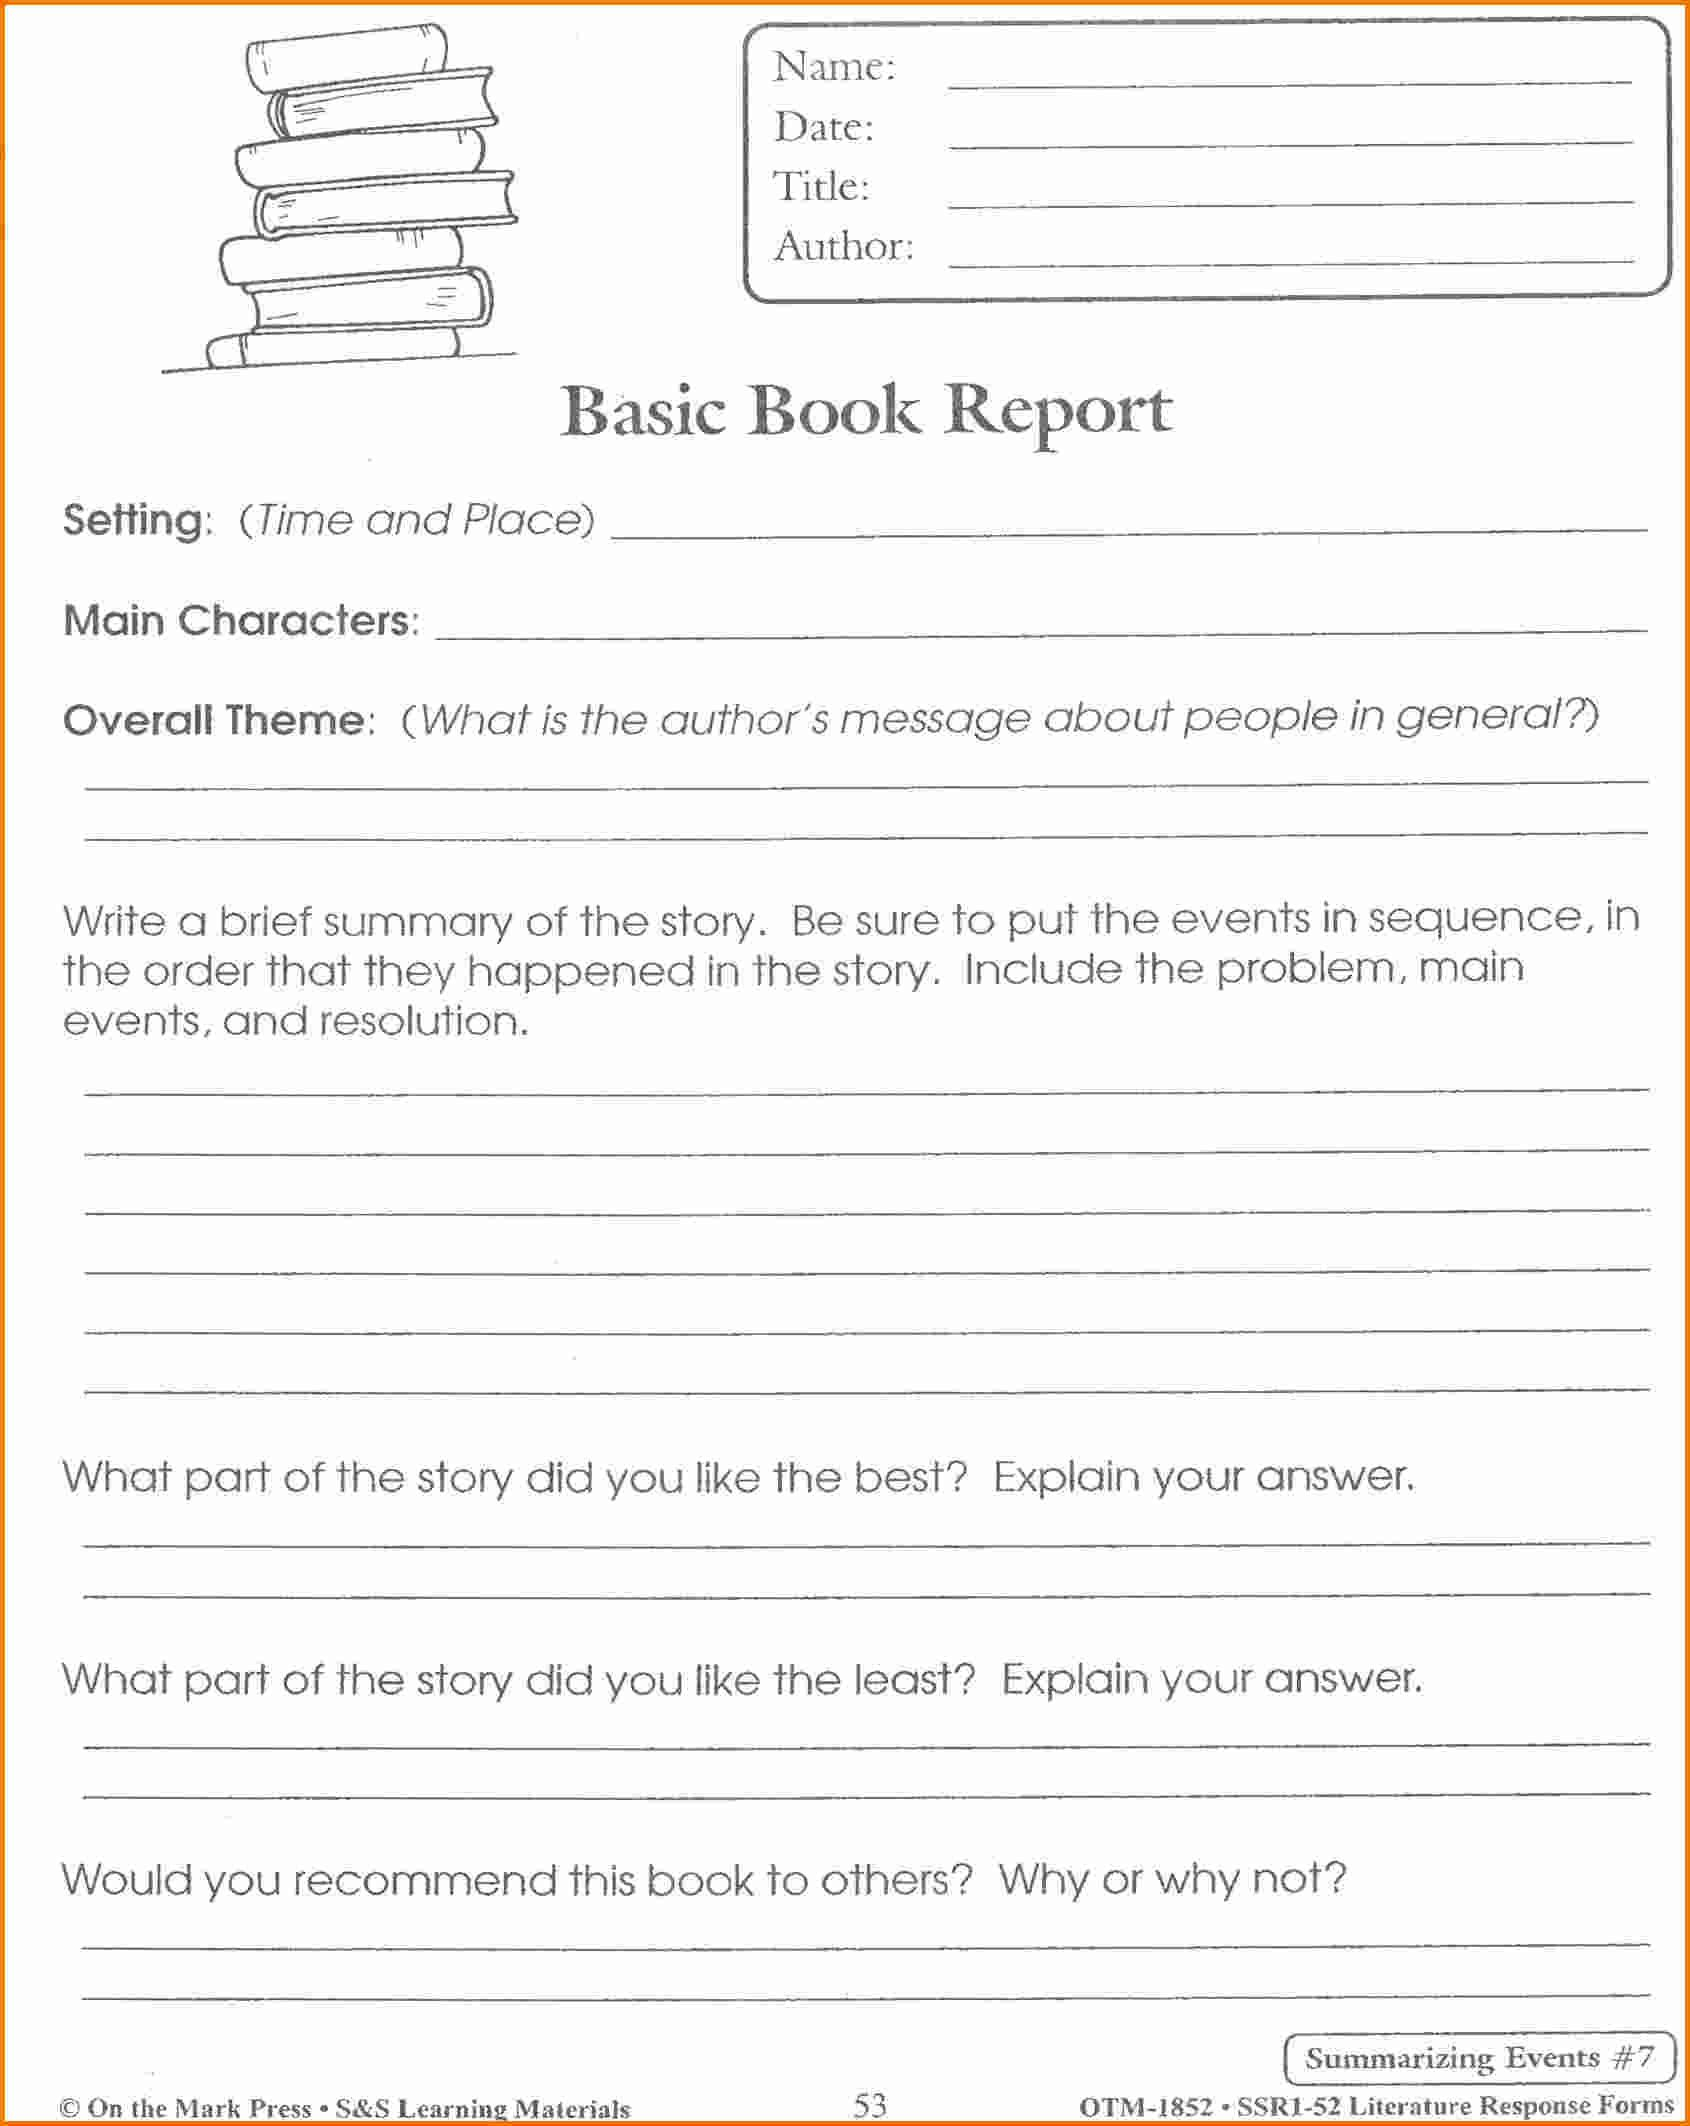 Pinmarcus Tong On Book | Book Report Templates, Book Throughout Book Report Template 5Th Grade